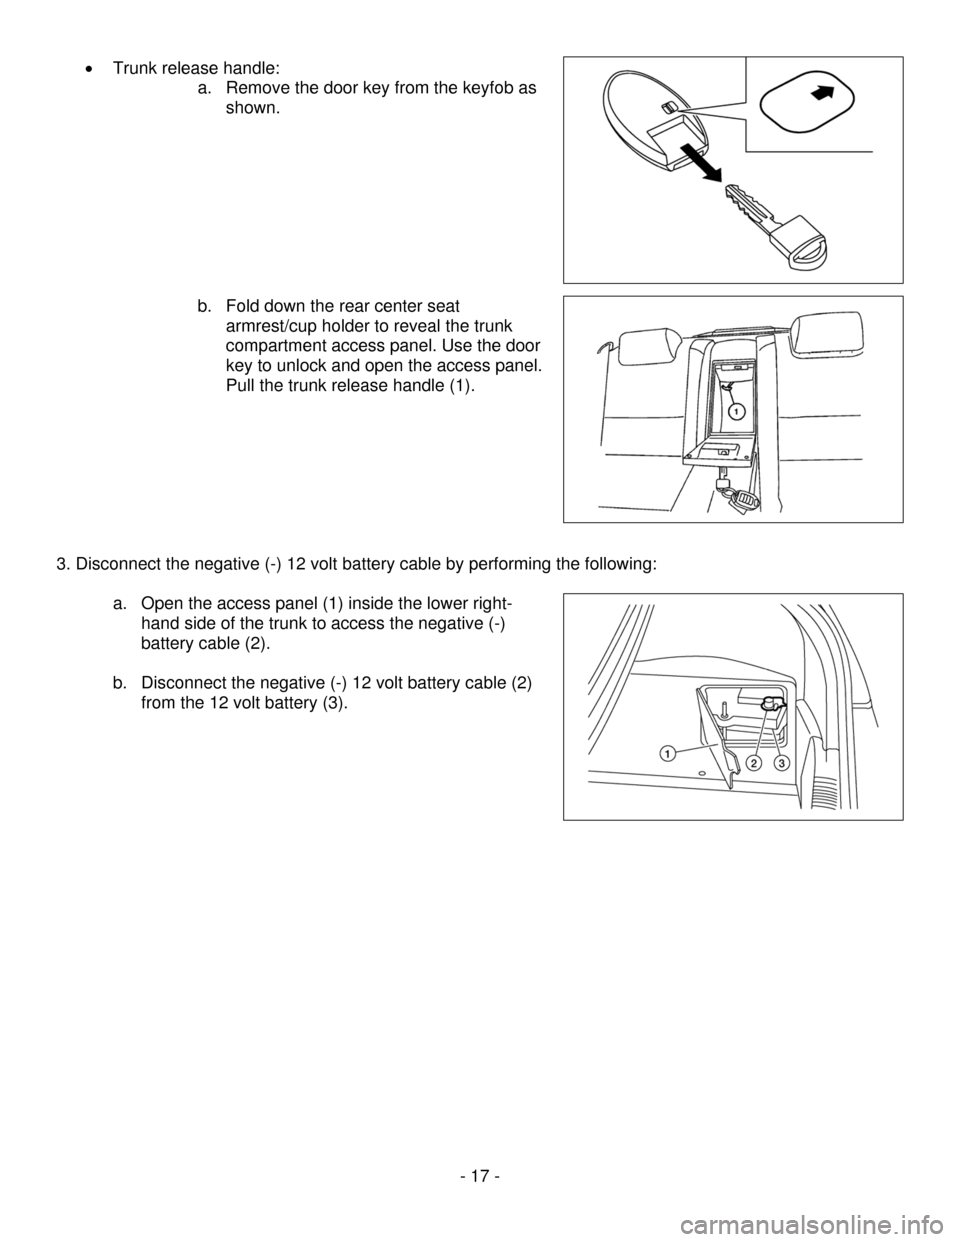 NISSAN ALTIMA HYBRID 2008 L32A / 4.G Dismantling Guide 
• Trunk release handle:  
a. Remove the door key from the keyfob as 
shown.  
 
 
 
 
 
 
 
 
 
b. Fold down the rear center seat 
armrest/cup holder to reveal the trunk 
compartment access panel. 